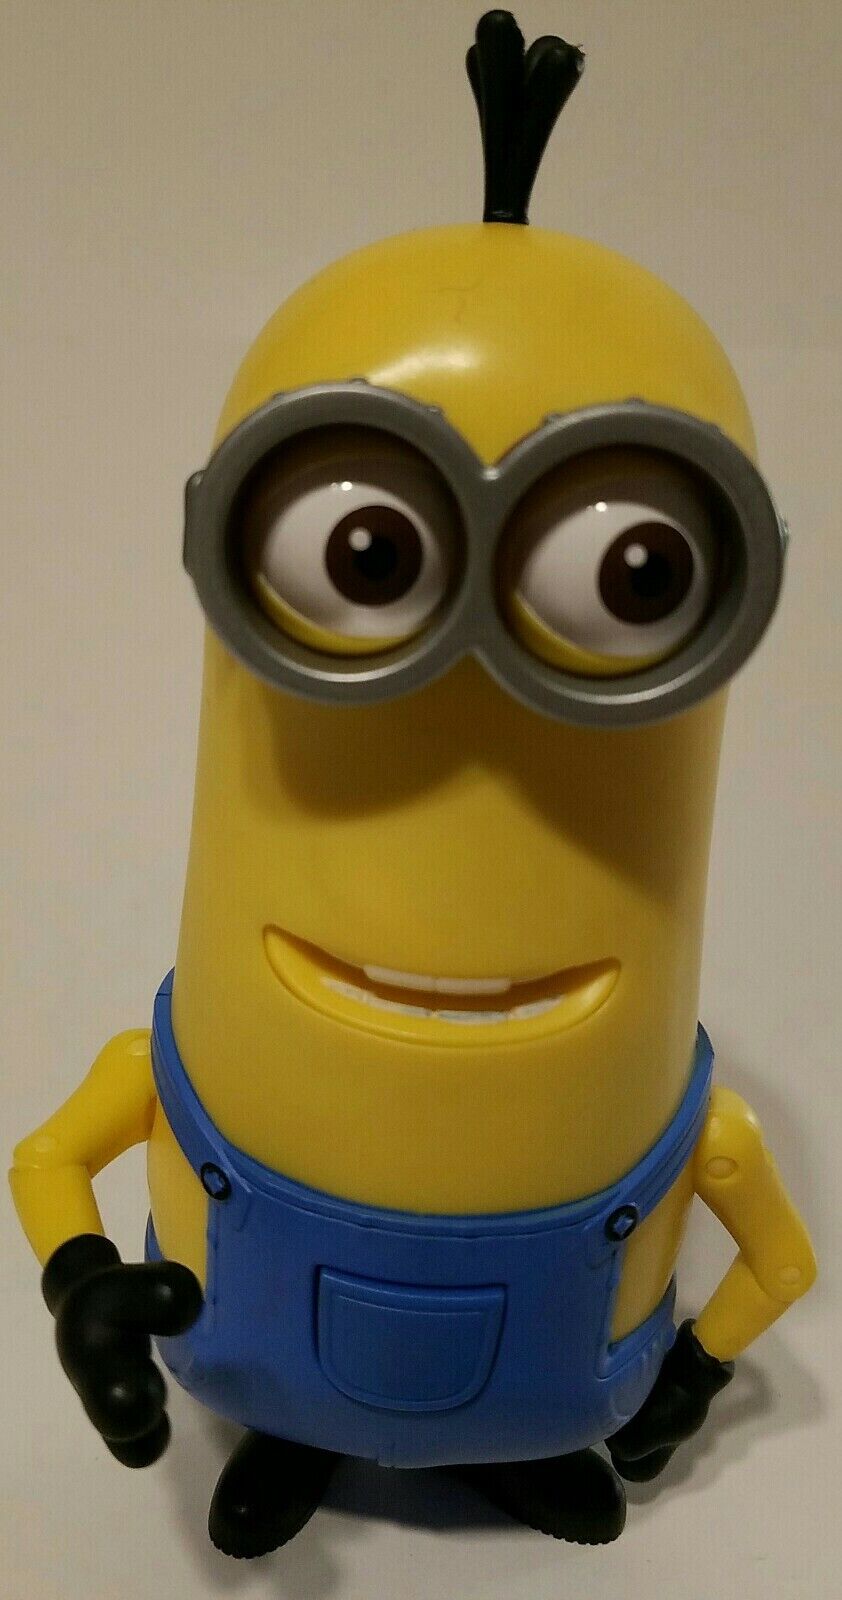 Minions Thinkway Toys Universal Studios Moving Eyes, Mouth Arms, Kevin Figure 5"